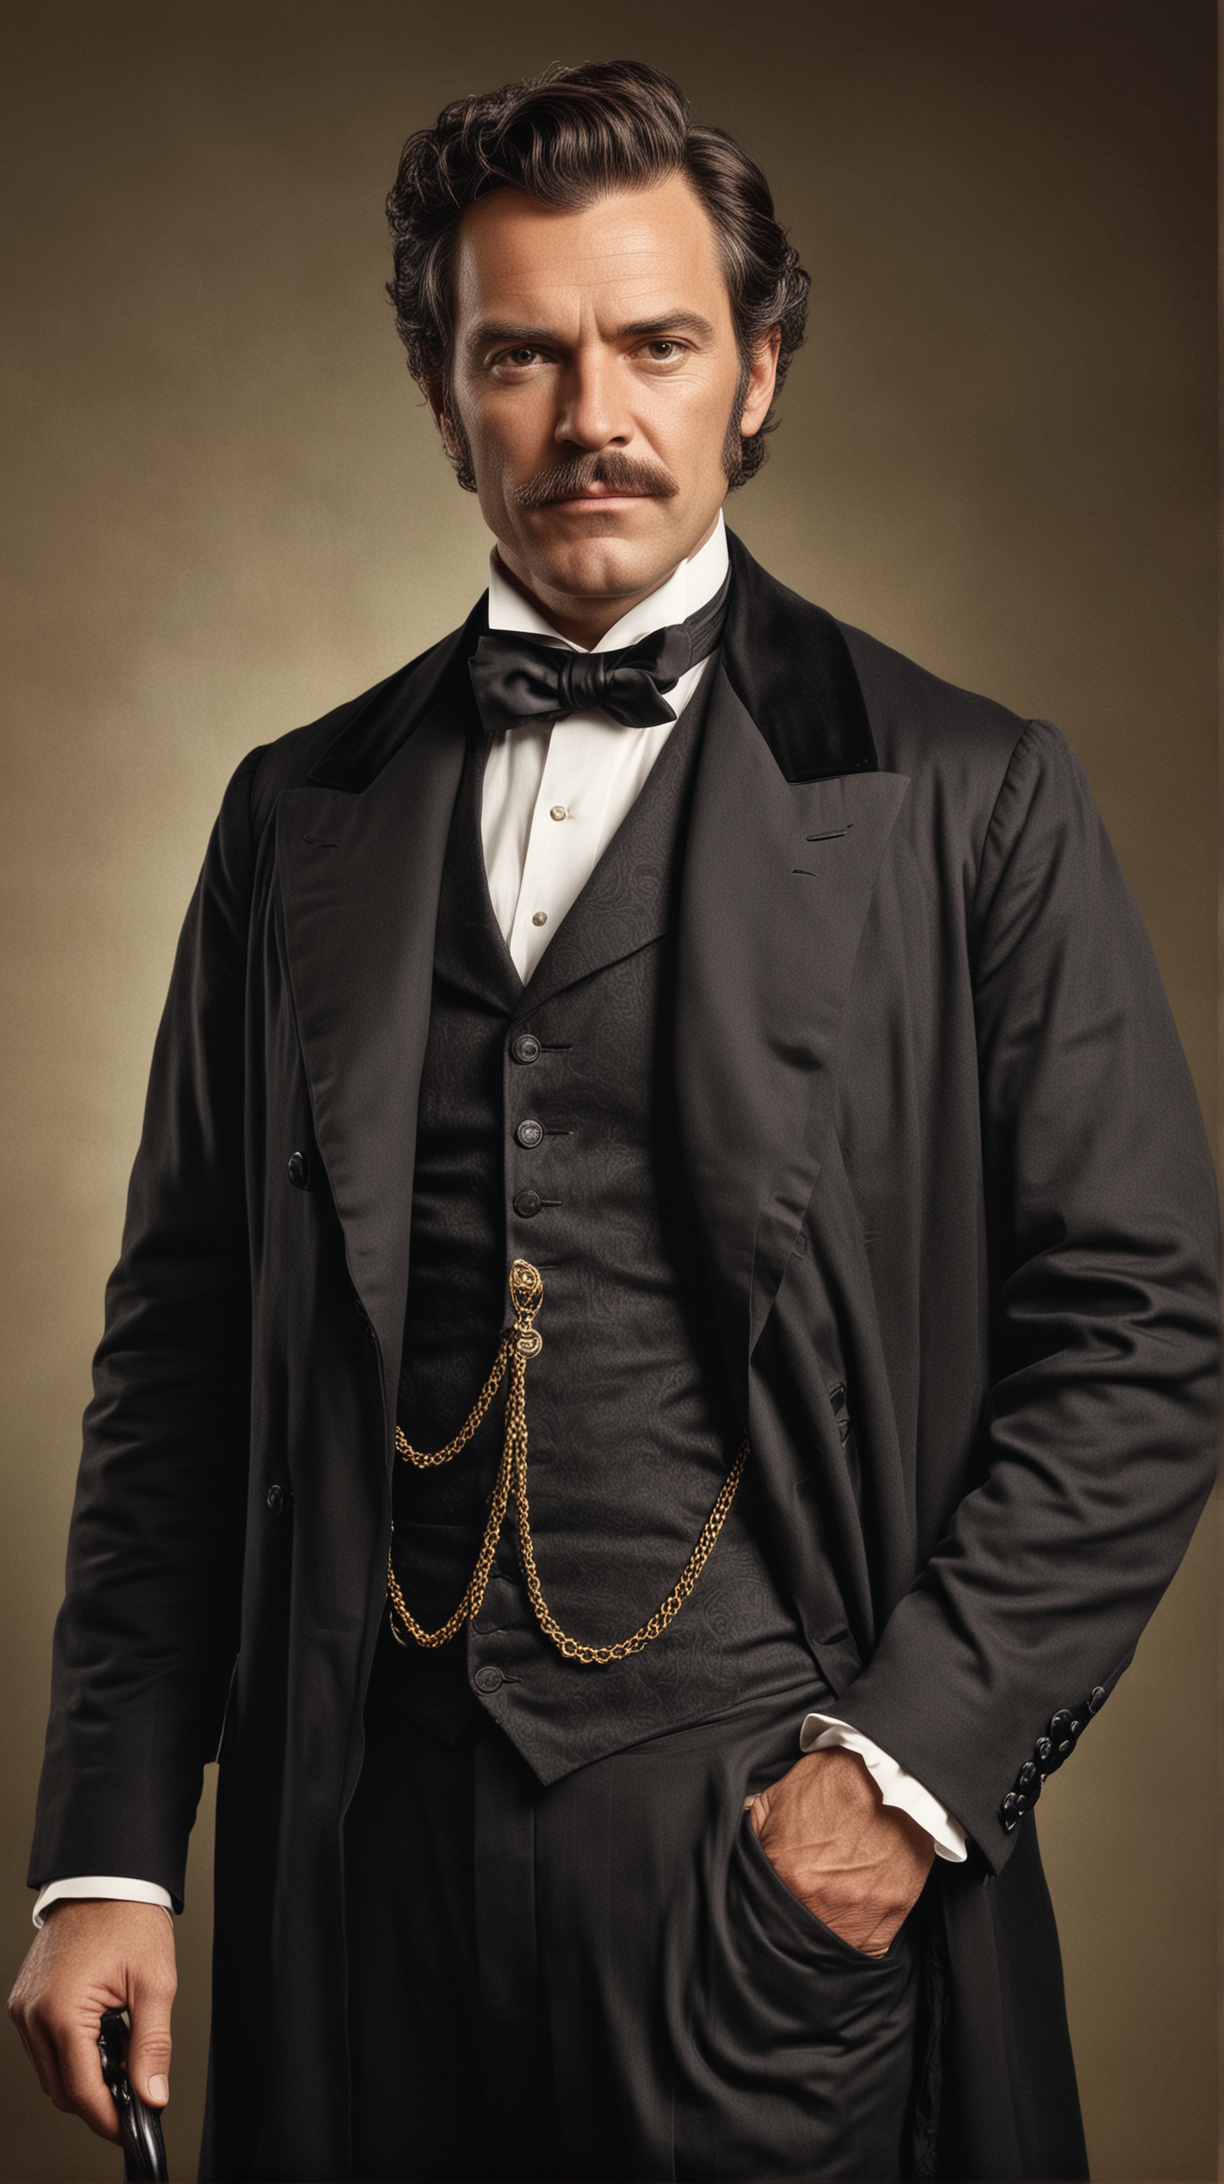 Wealthy Businessman in 19th Century Setting with Distinctive Attire